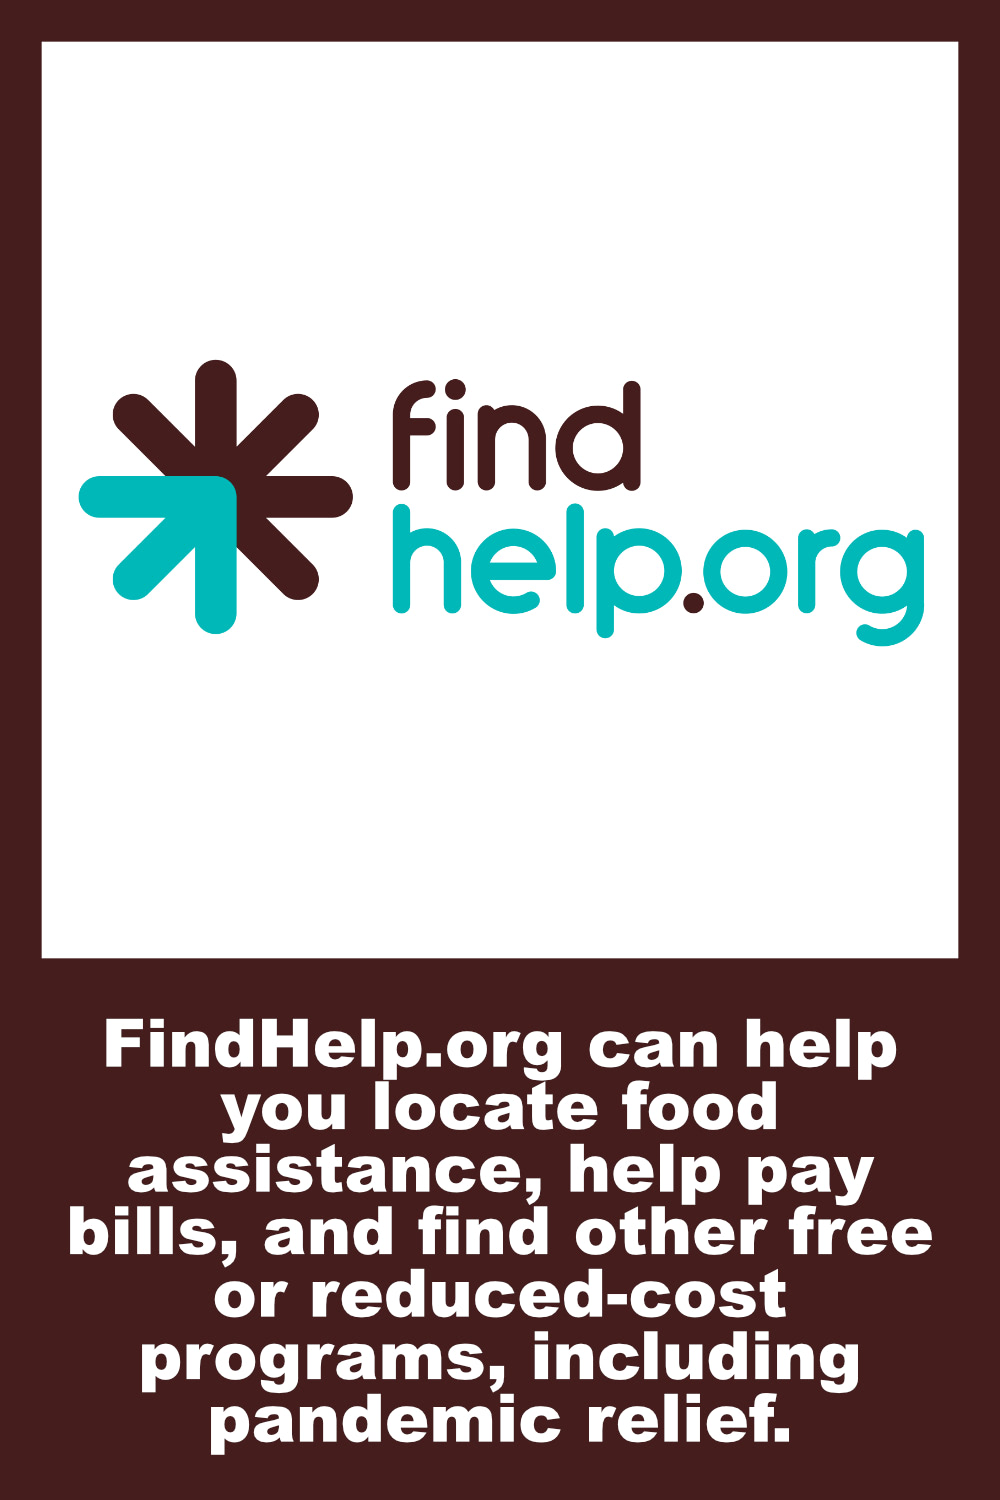 FindHelp.org can help you locate food assistance, help pay bills, and find other free or reduced-cost programs, including pandemic relief.